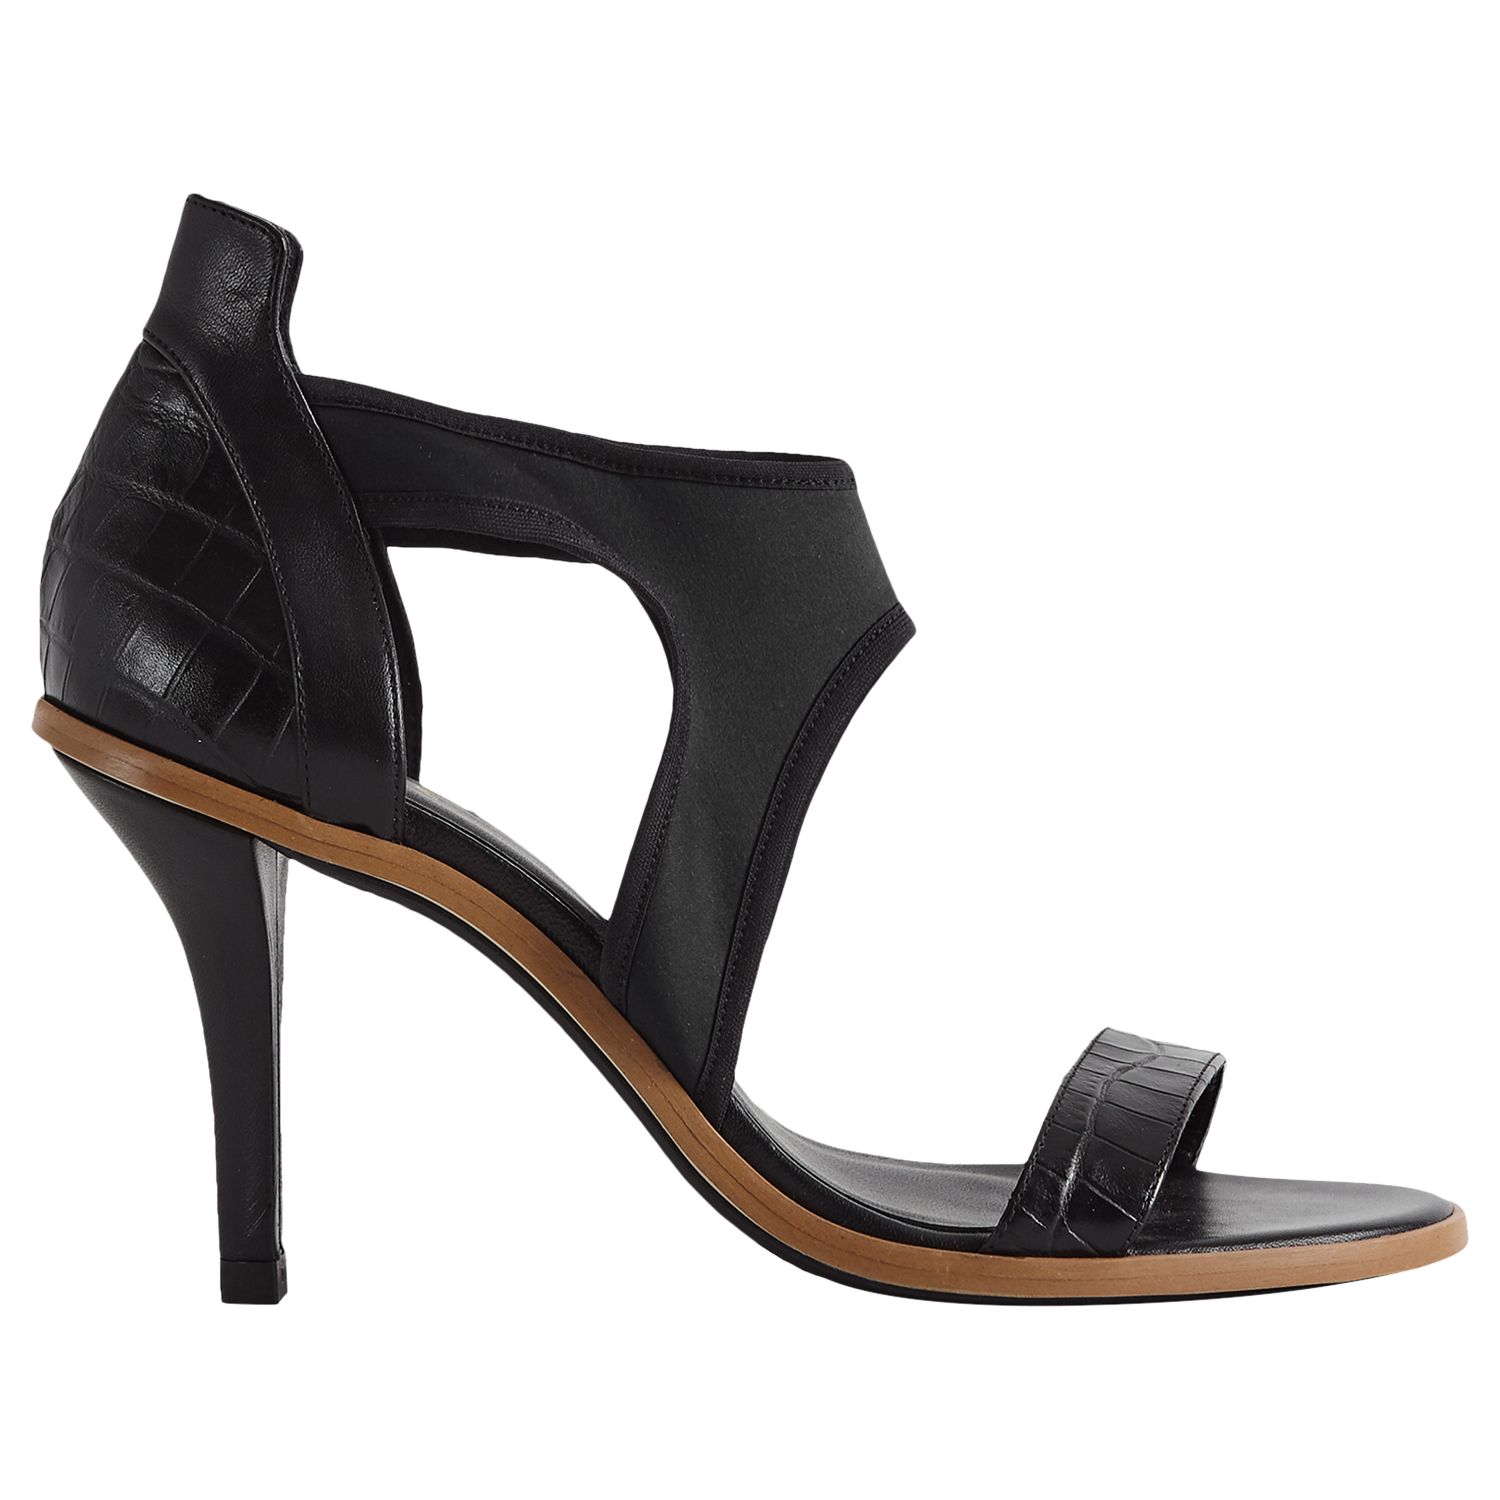 Reiss Camille High-Heeled Strappy Sandals, Black